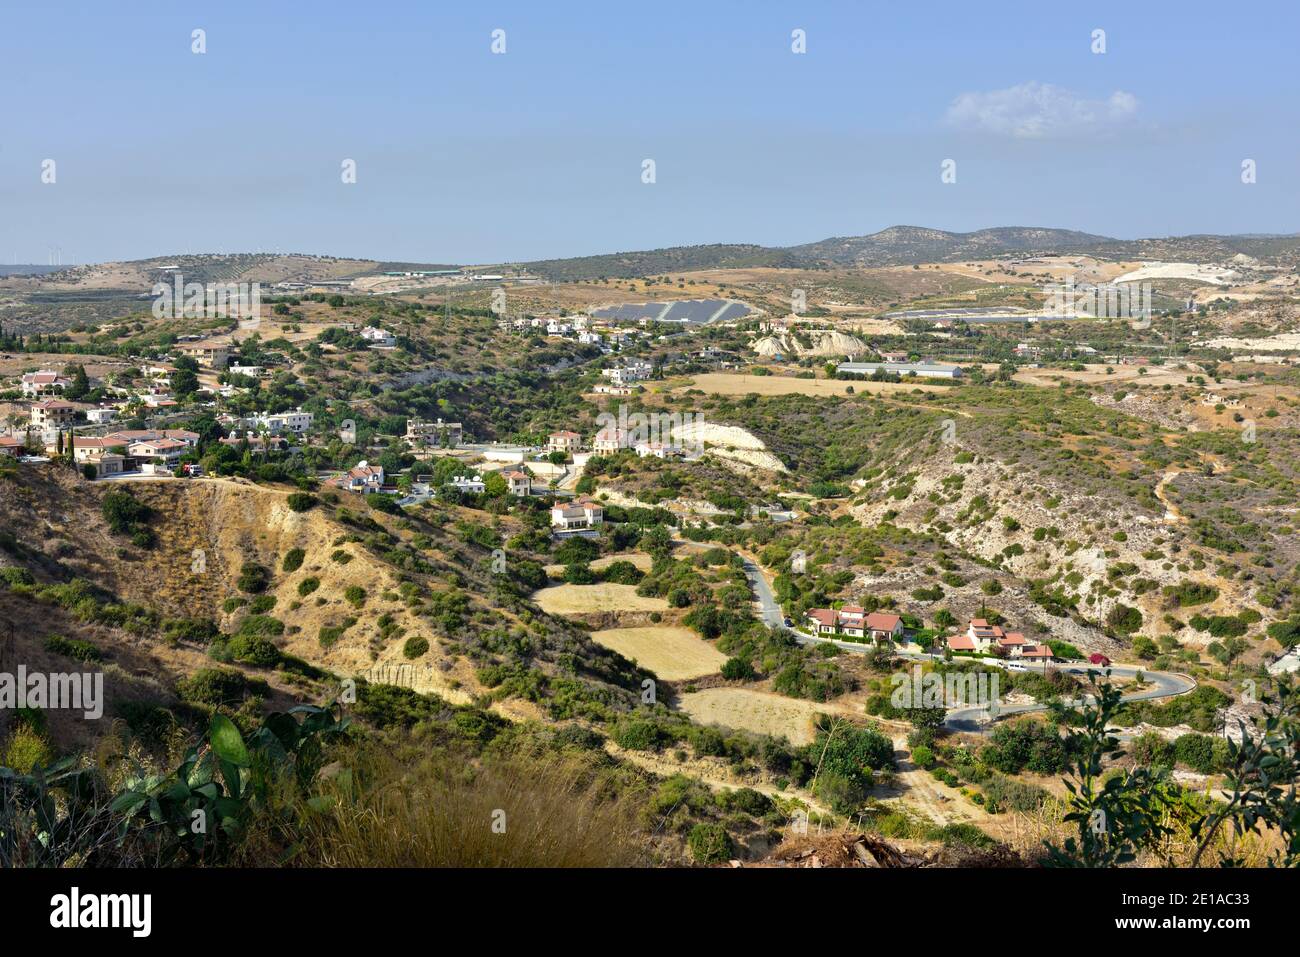 Wide view of interior landscape of Cyprus in the Pissouri region with scattered houses and hills Stock Photo